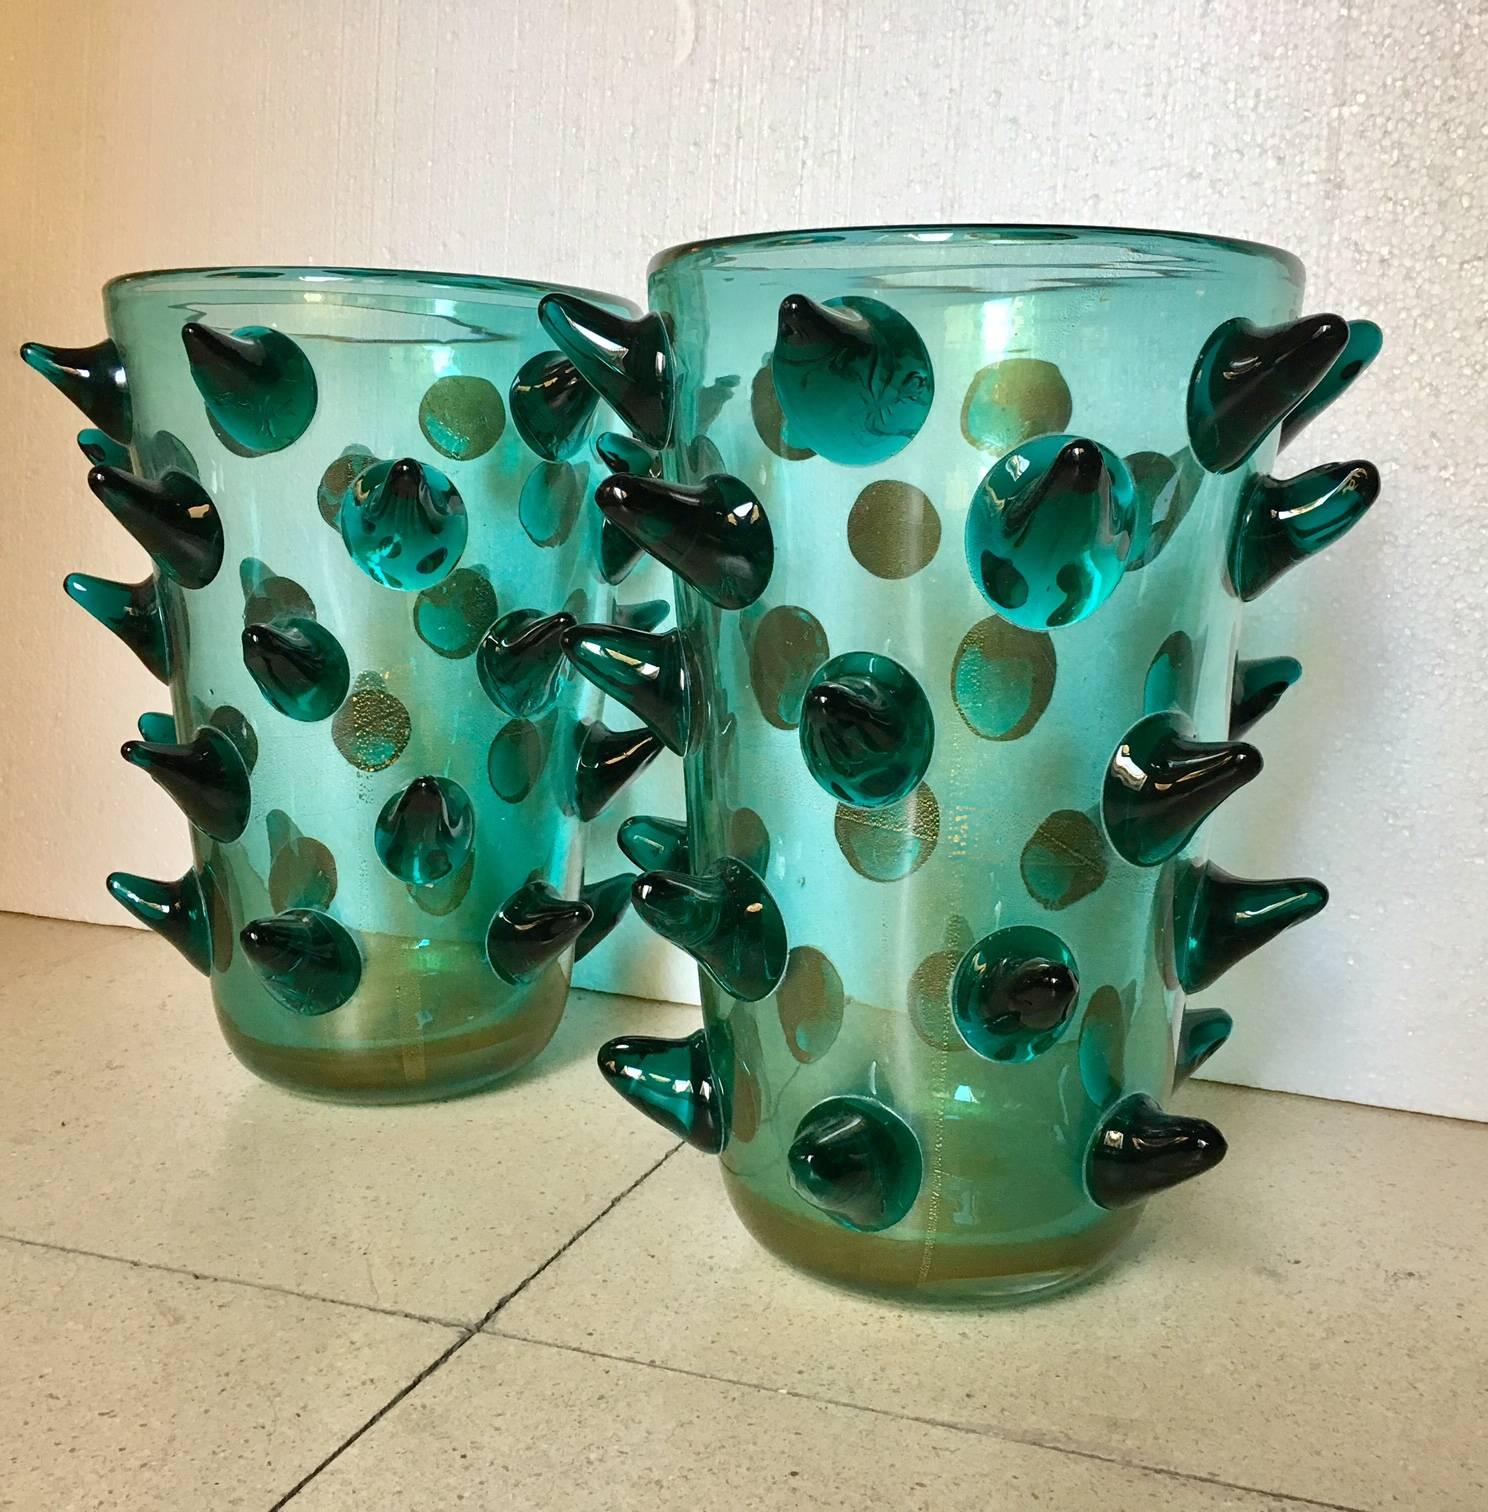 Pair of vases signed by Constantini, made in green Murano glass, gold sprinkled technique, peaks decorate the outside.